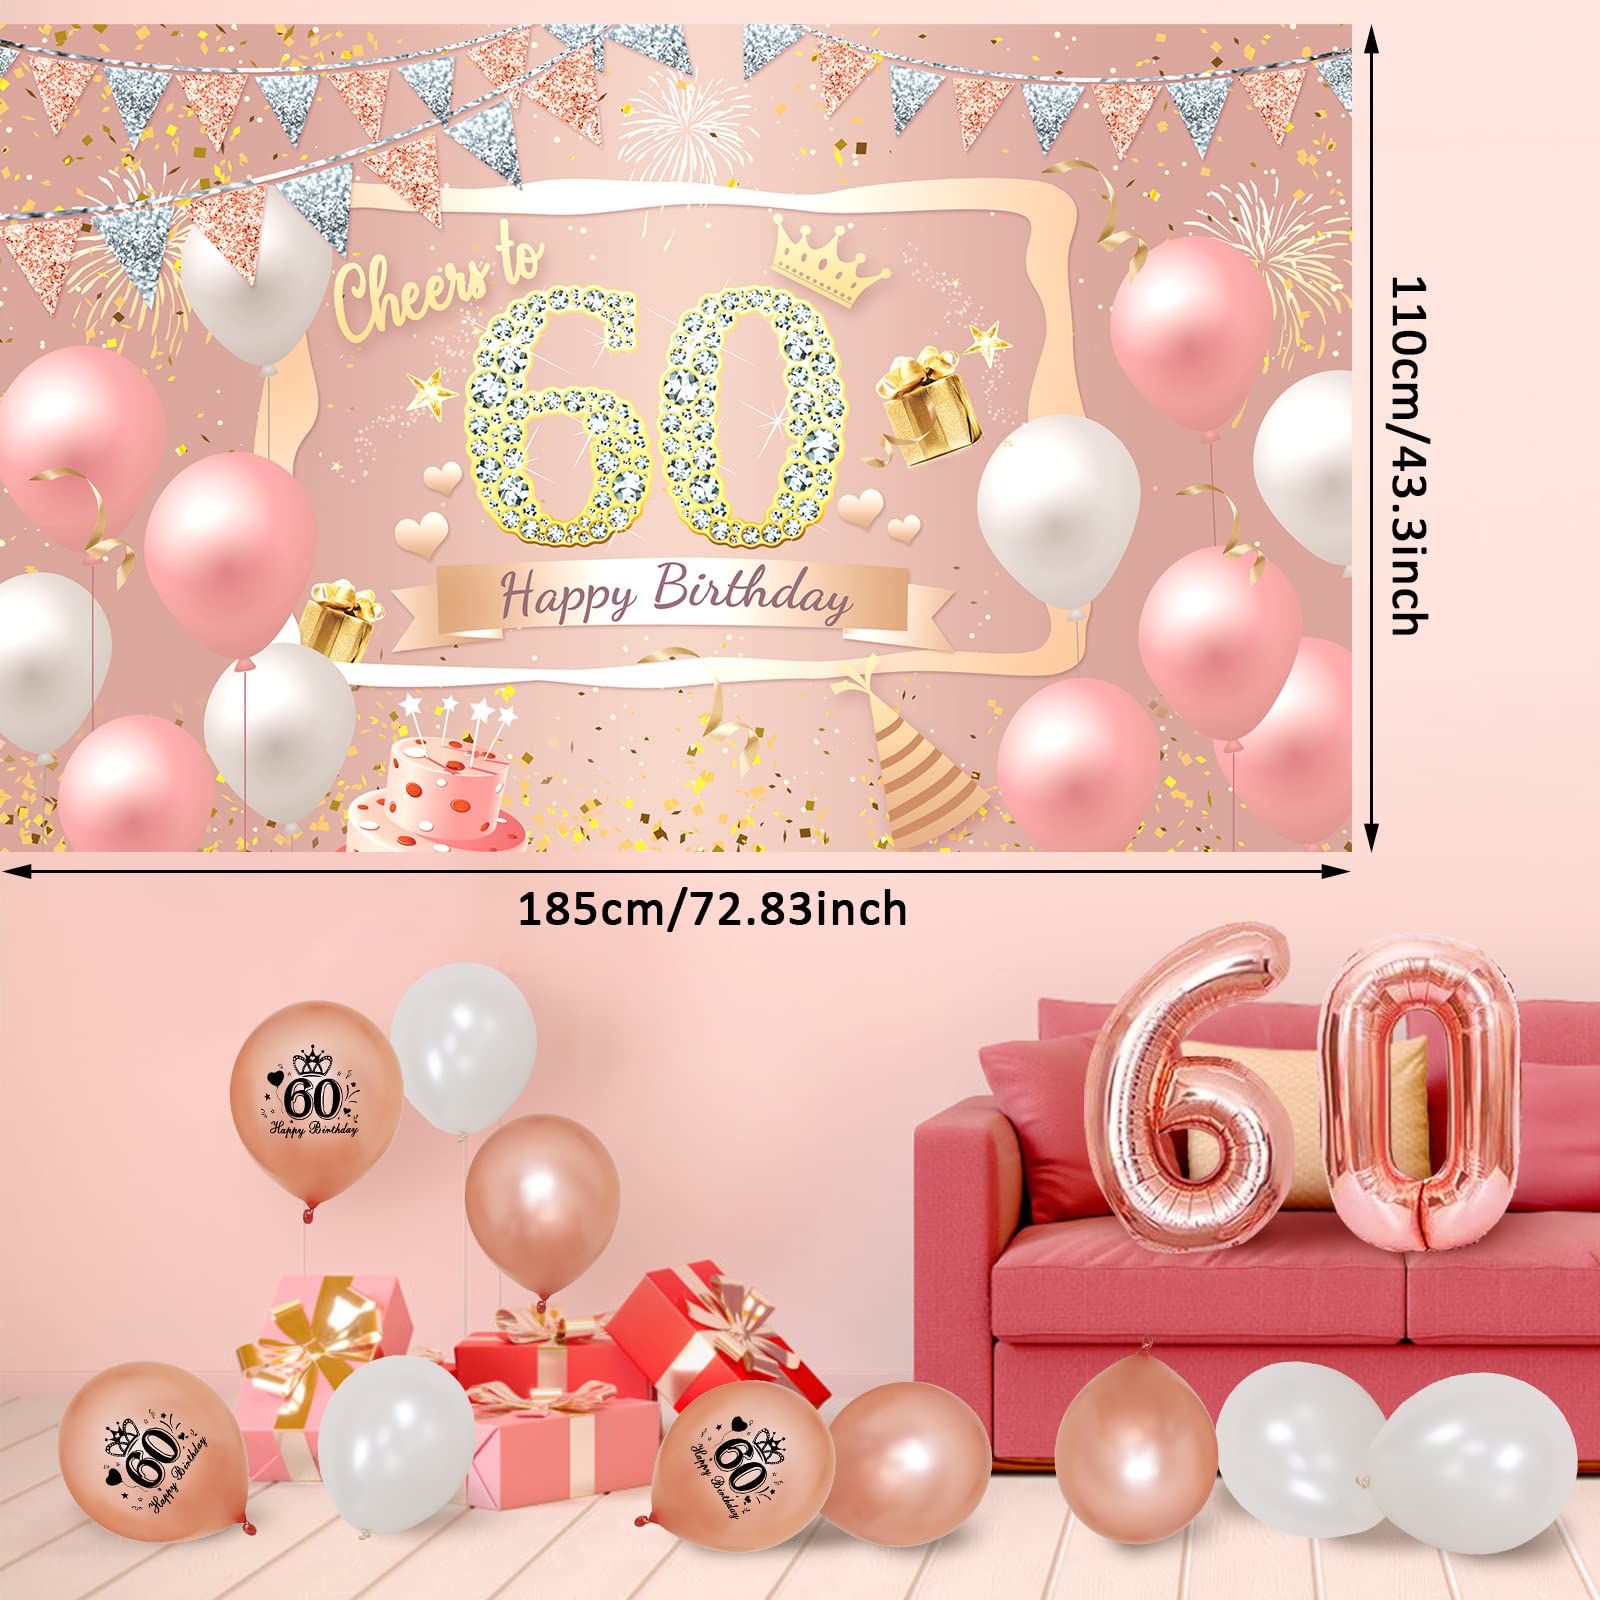 60th Birthday Decorations Women, Including Pink Rose Gold 60th Birthday Banner Backdrop Decor, Number 60th Birthday Balloon, 70 Pieces Rose Gold Balloon Arch Garland Kit for 60th Birthday